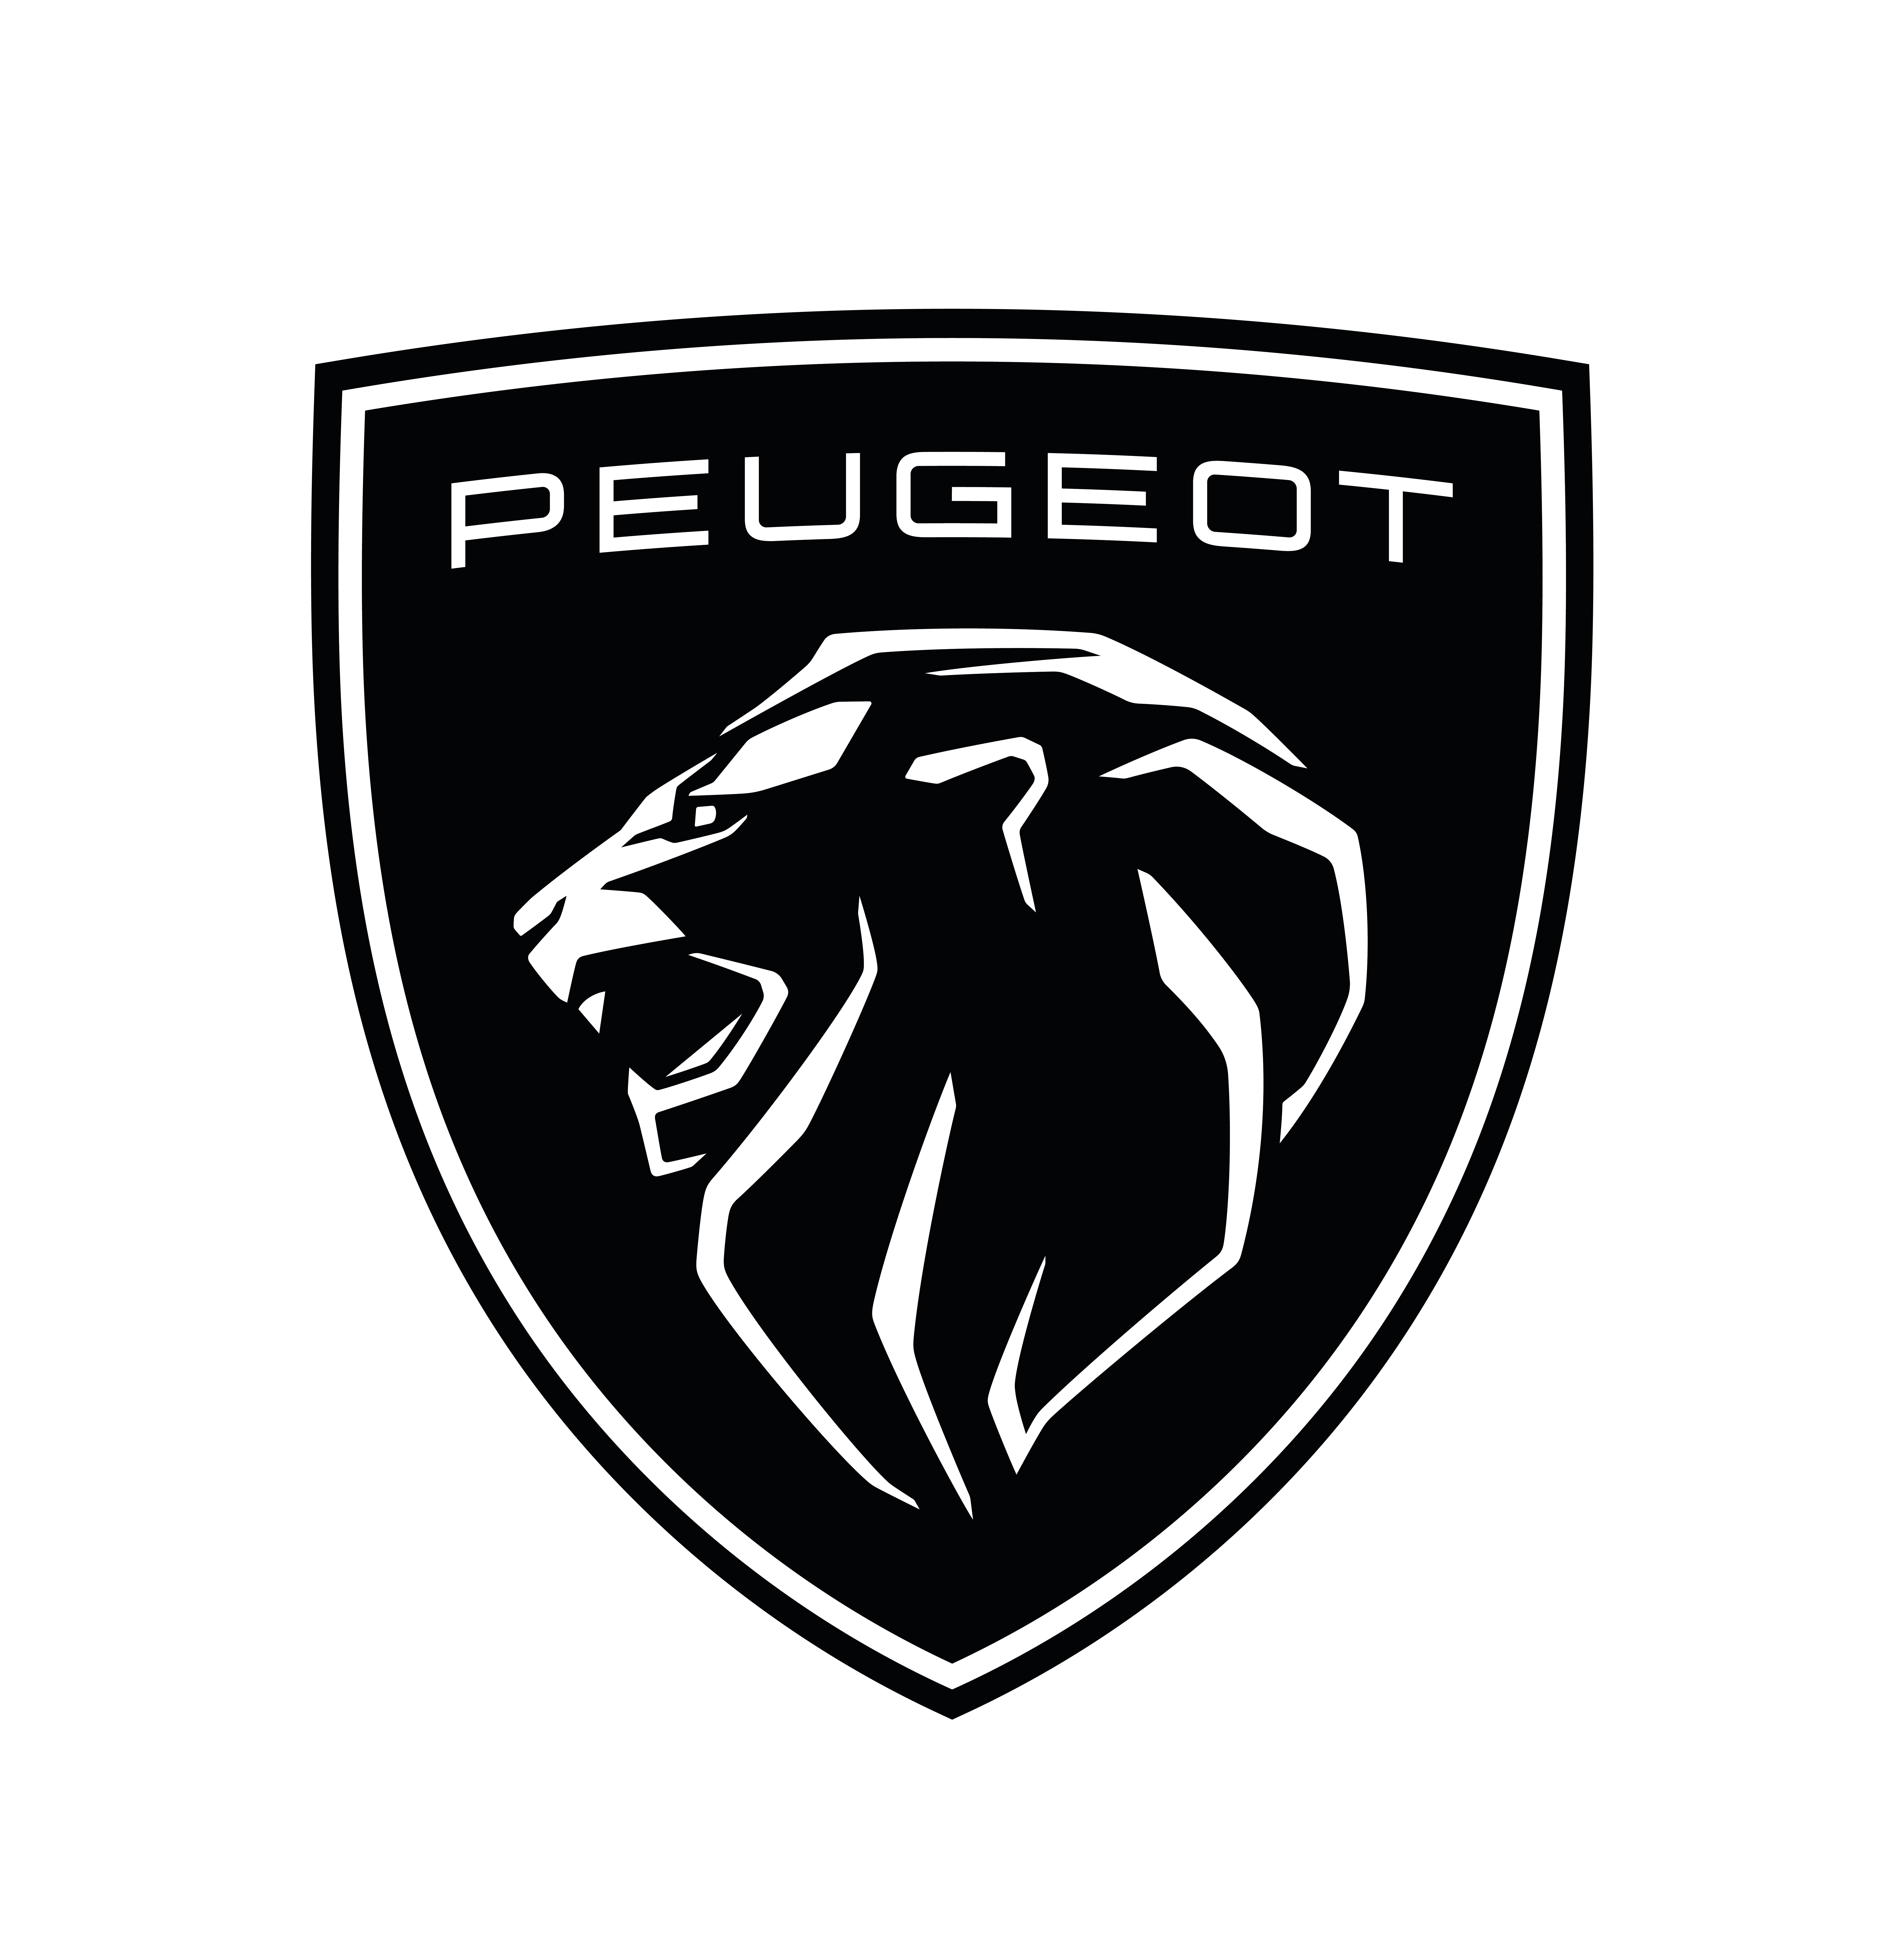 Logo of Swansway Chester Peugeot Automobile Dealers In Chester, Cheshire